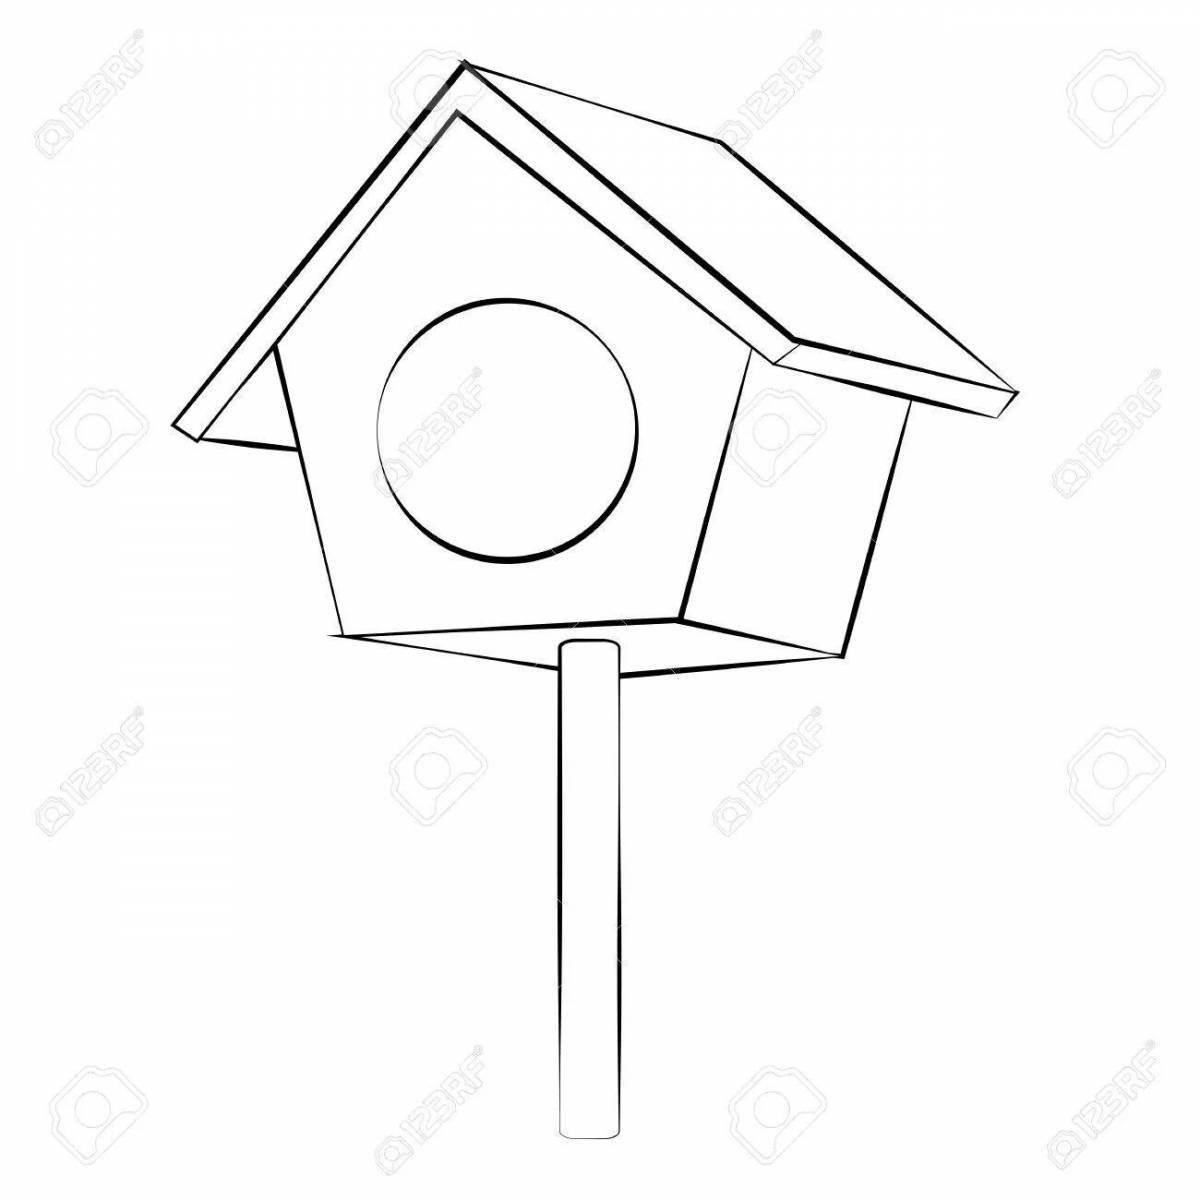 Fun coloring birdhouse for preschoolers 3-4 years old